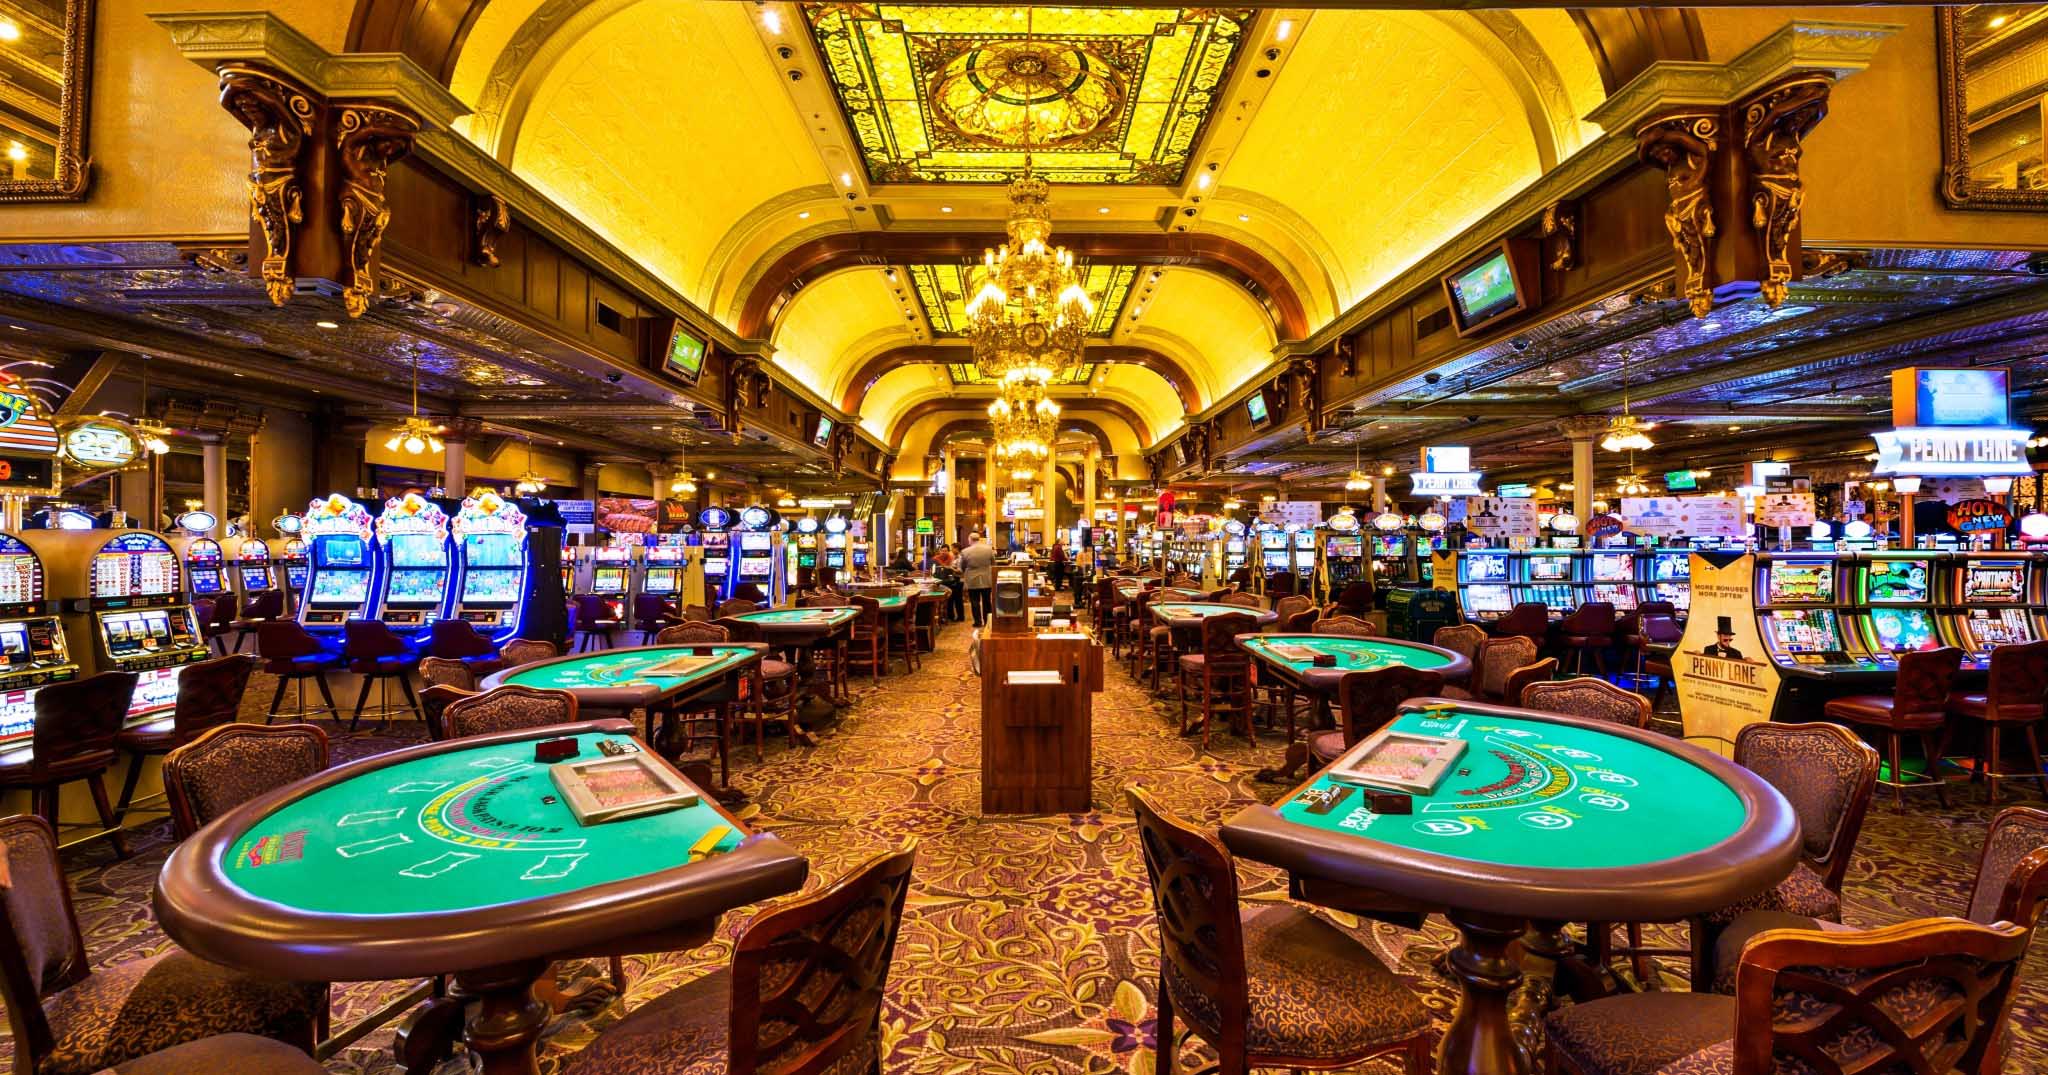 Are You Good At casinos? Here's A Quick Quiz To Find Out